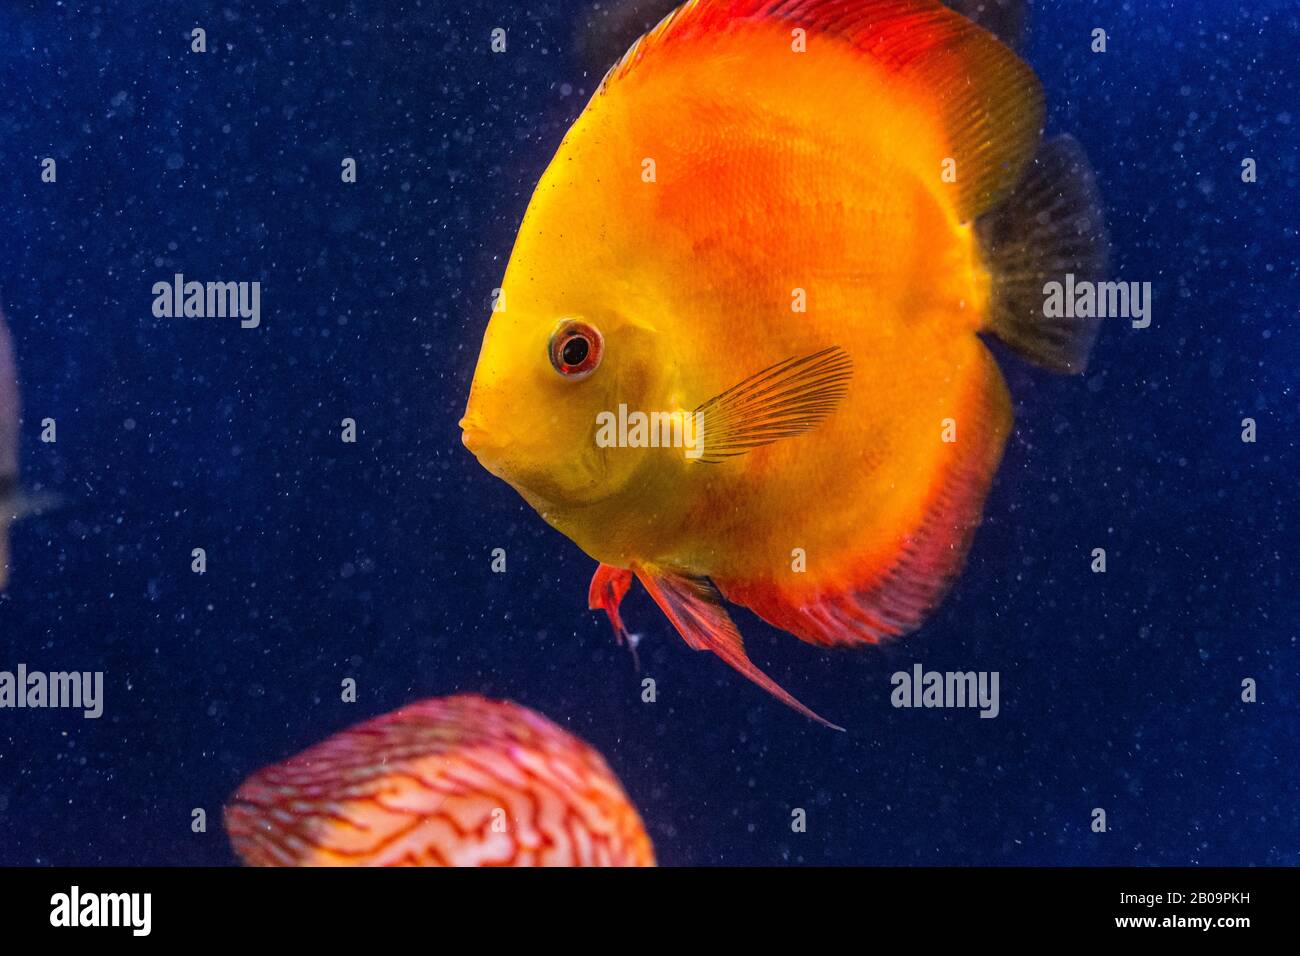 Symphysodon discus is swimming among mangrove roots Stock Photo